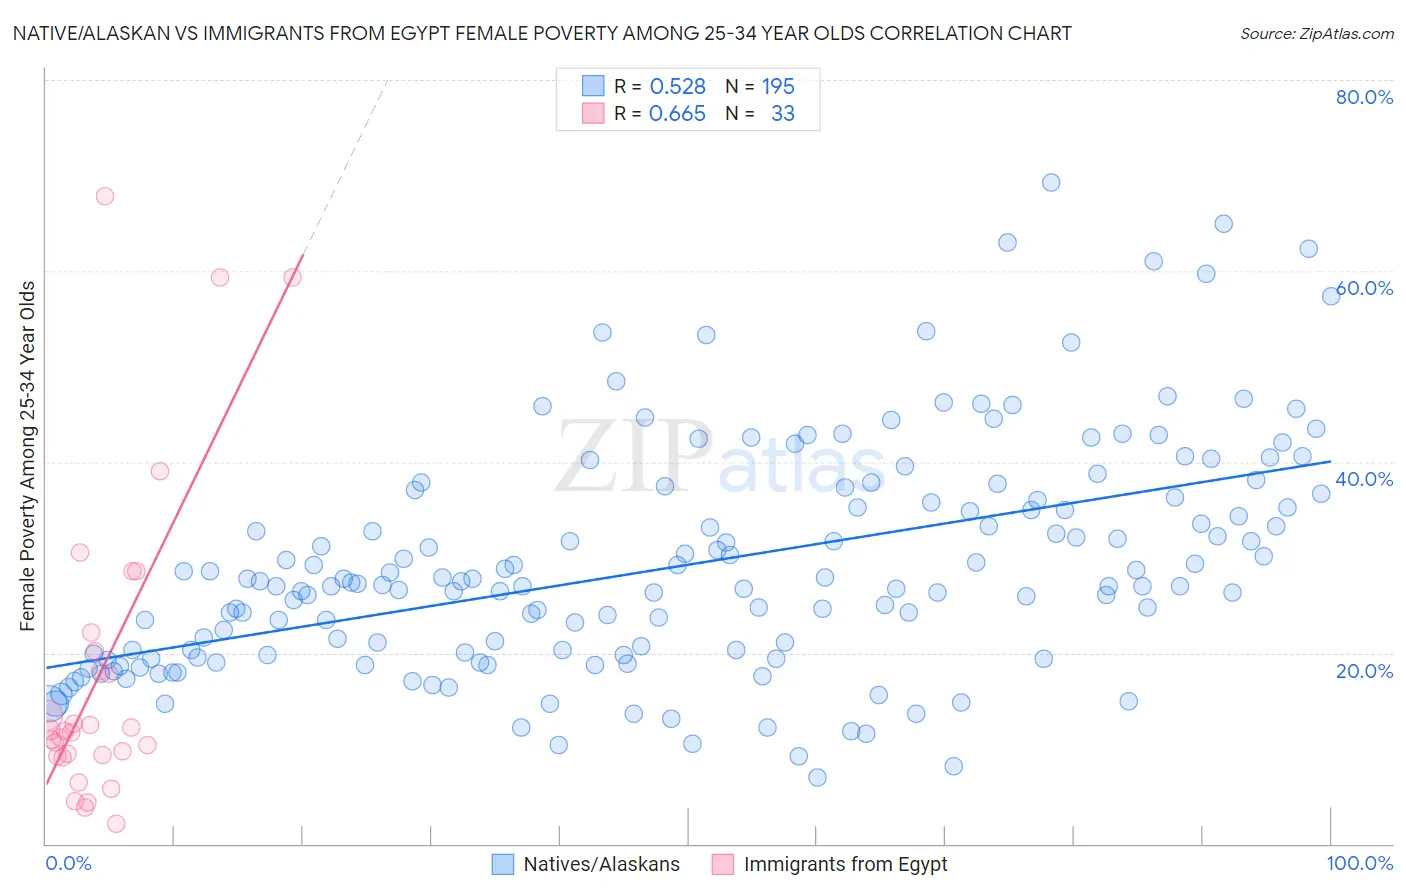 Native/Alaskan vs Immigrants from Egypt Female Poverty Among 25-34 Year Olds